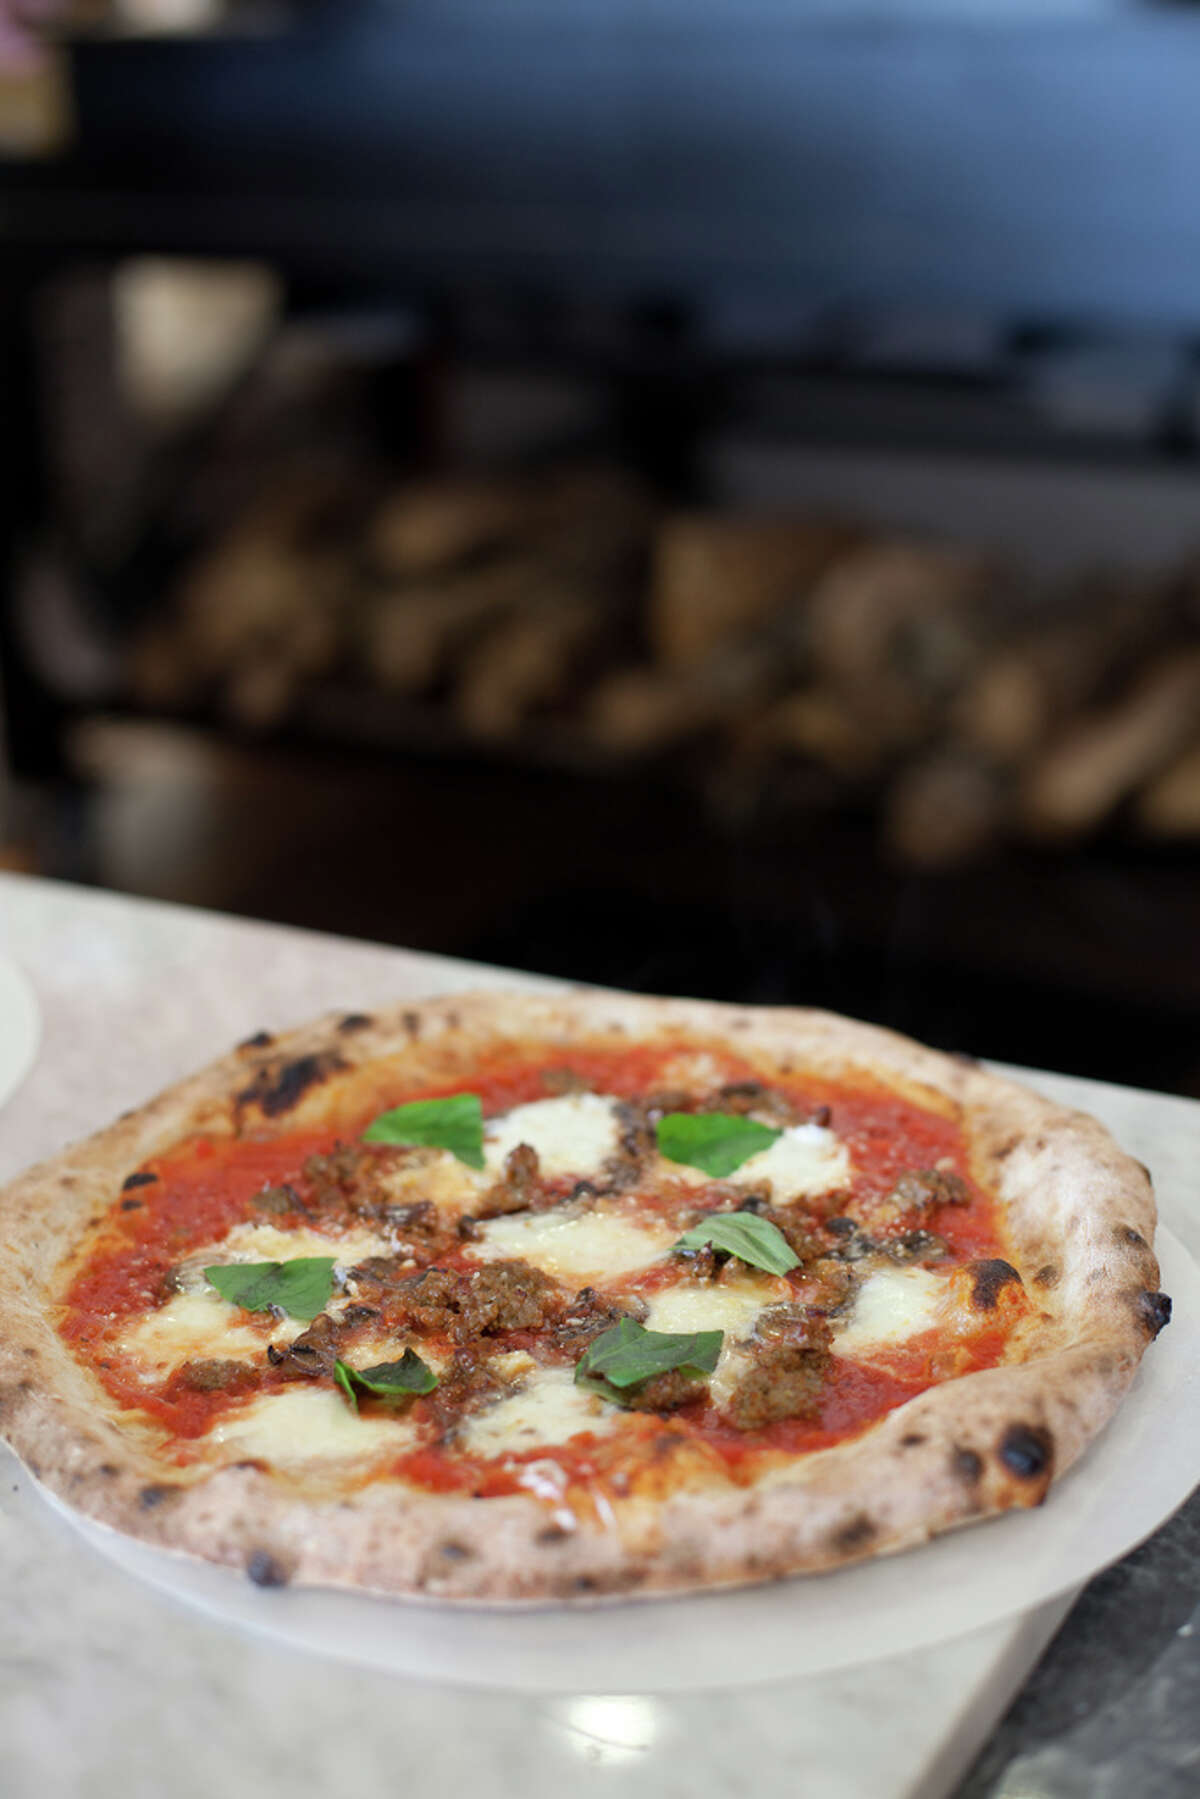 A pizza just out of the wood-fired oven at Pizaro's Pizza.